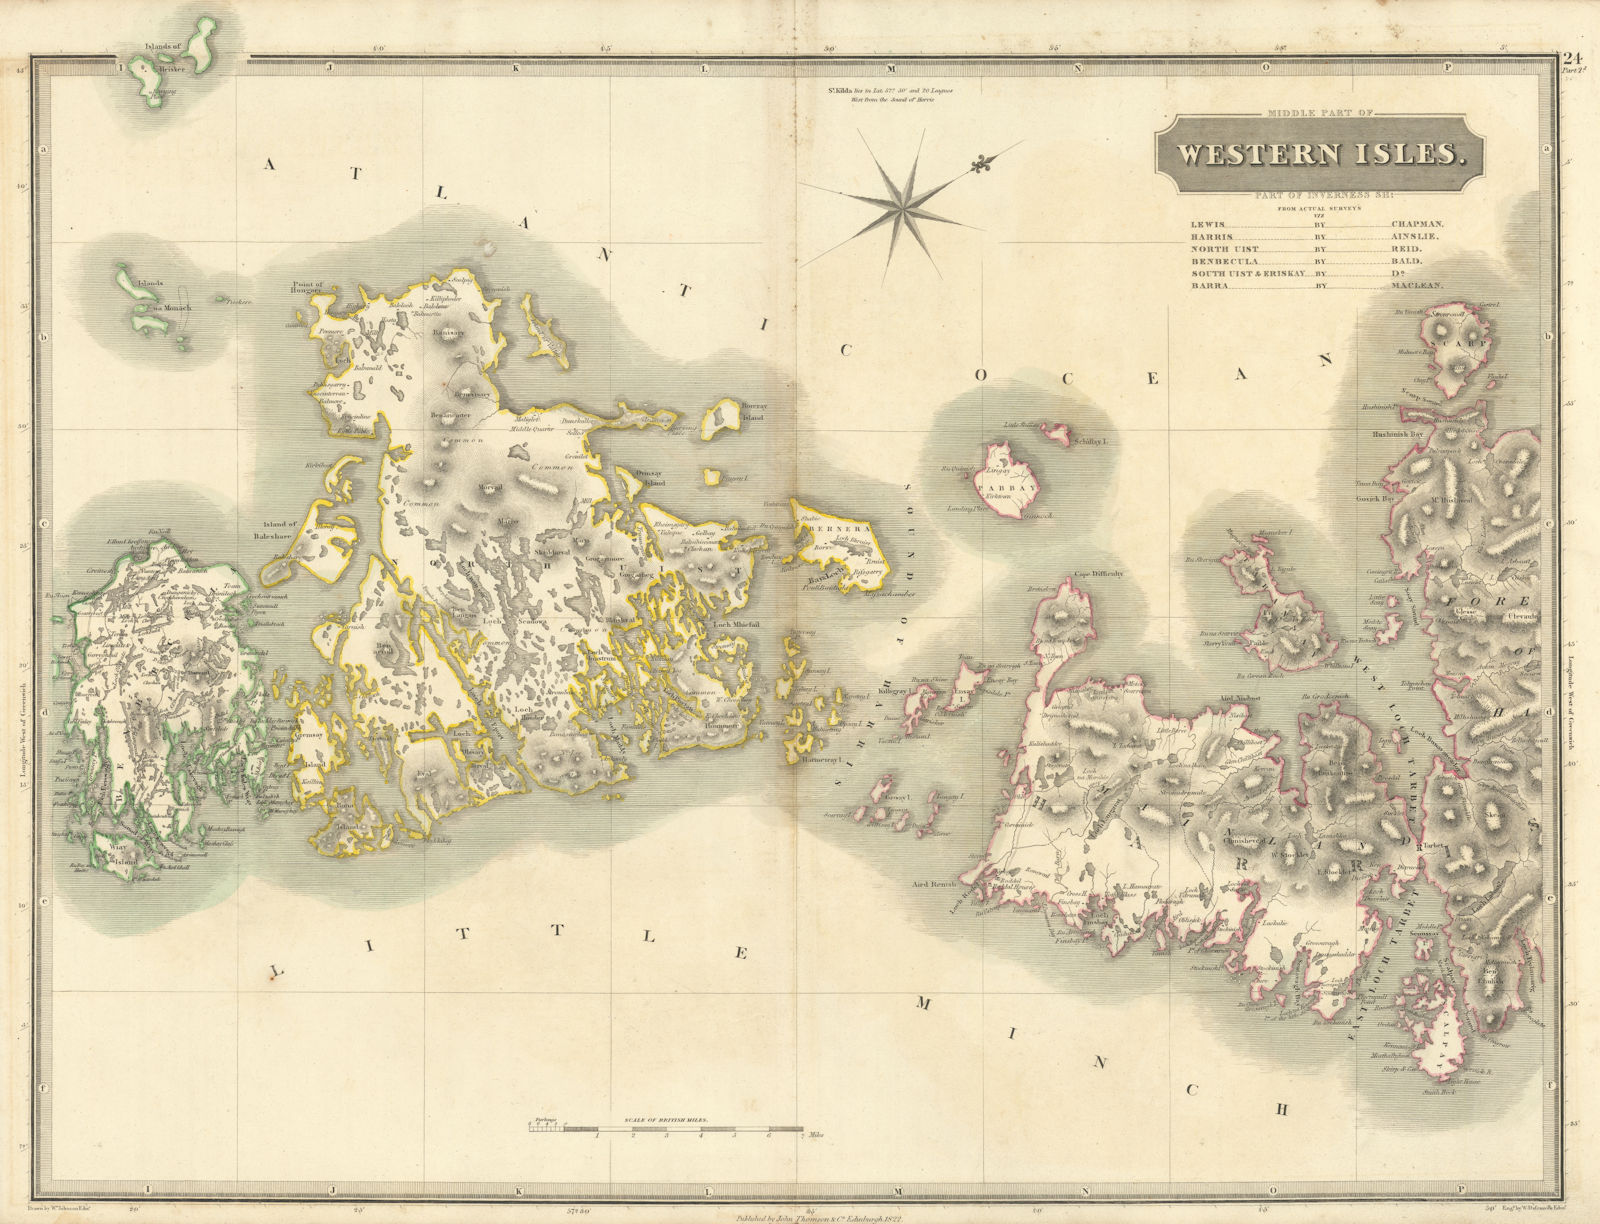 Western Isles middle. Inverness-shire Harris N. Uist Benbecula. THOMSON 1832 map